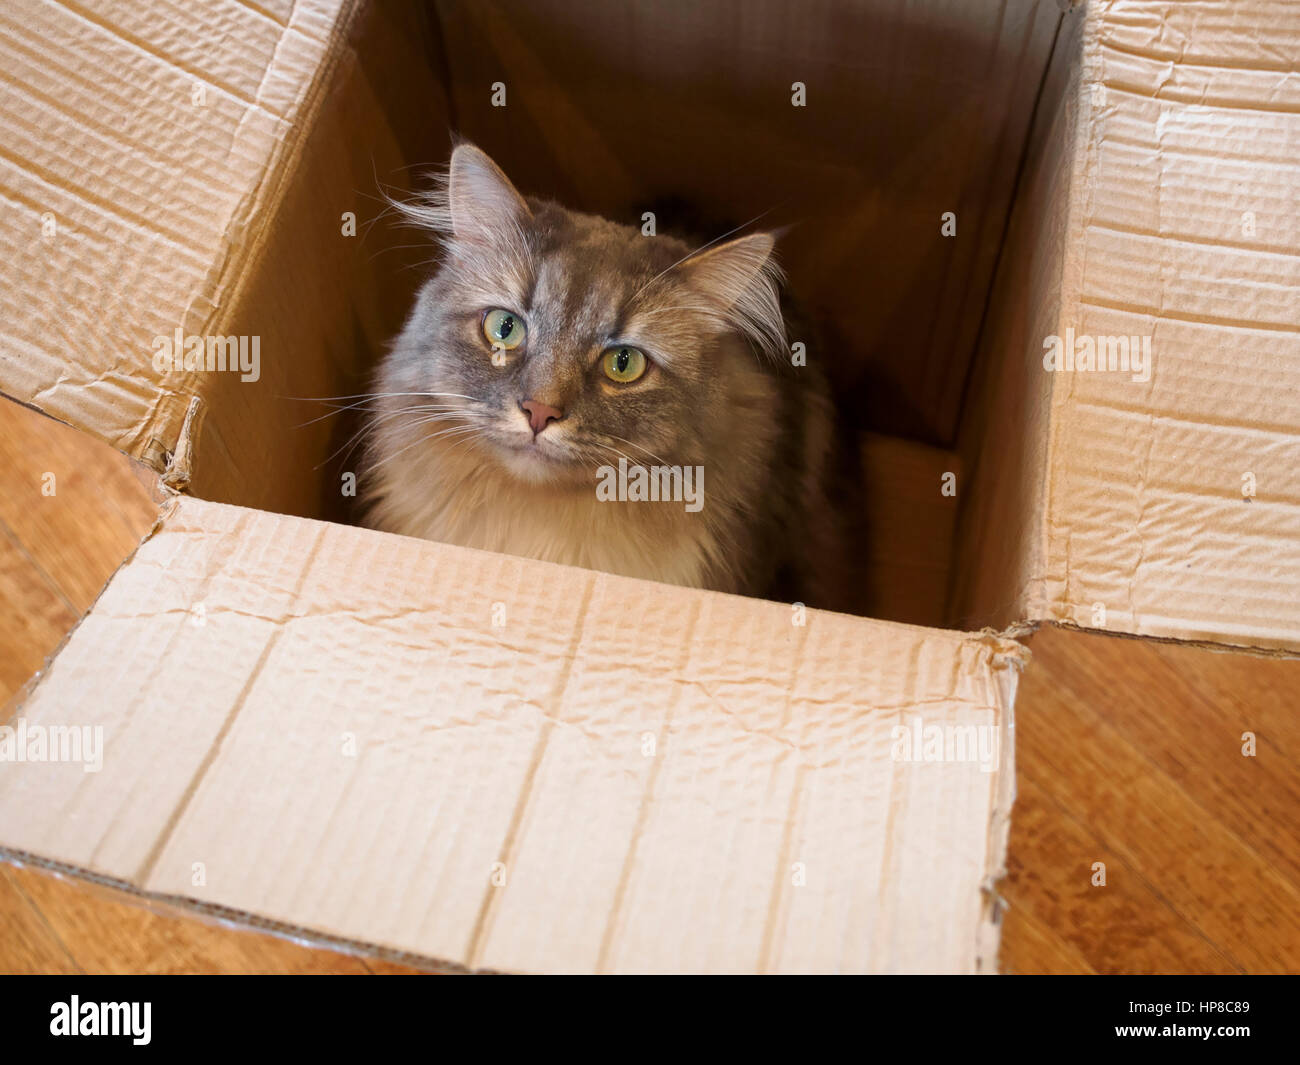 Grey and white longhaired cat in a cardboard box Stock Photo